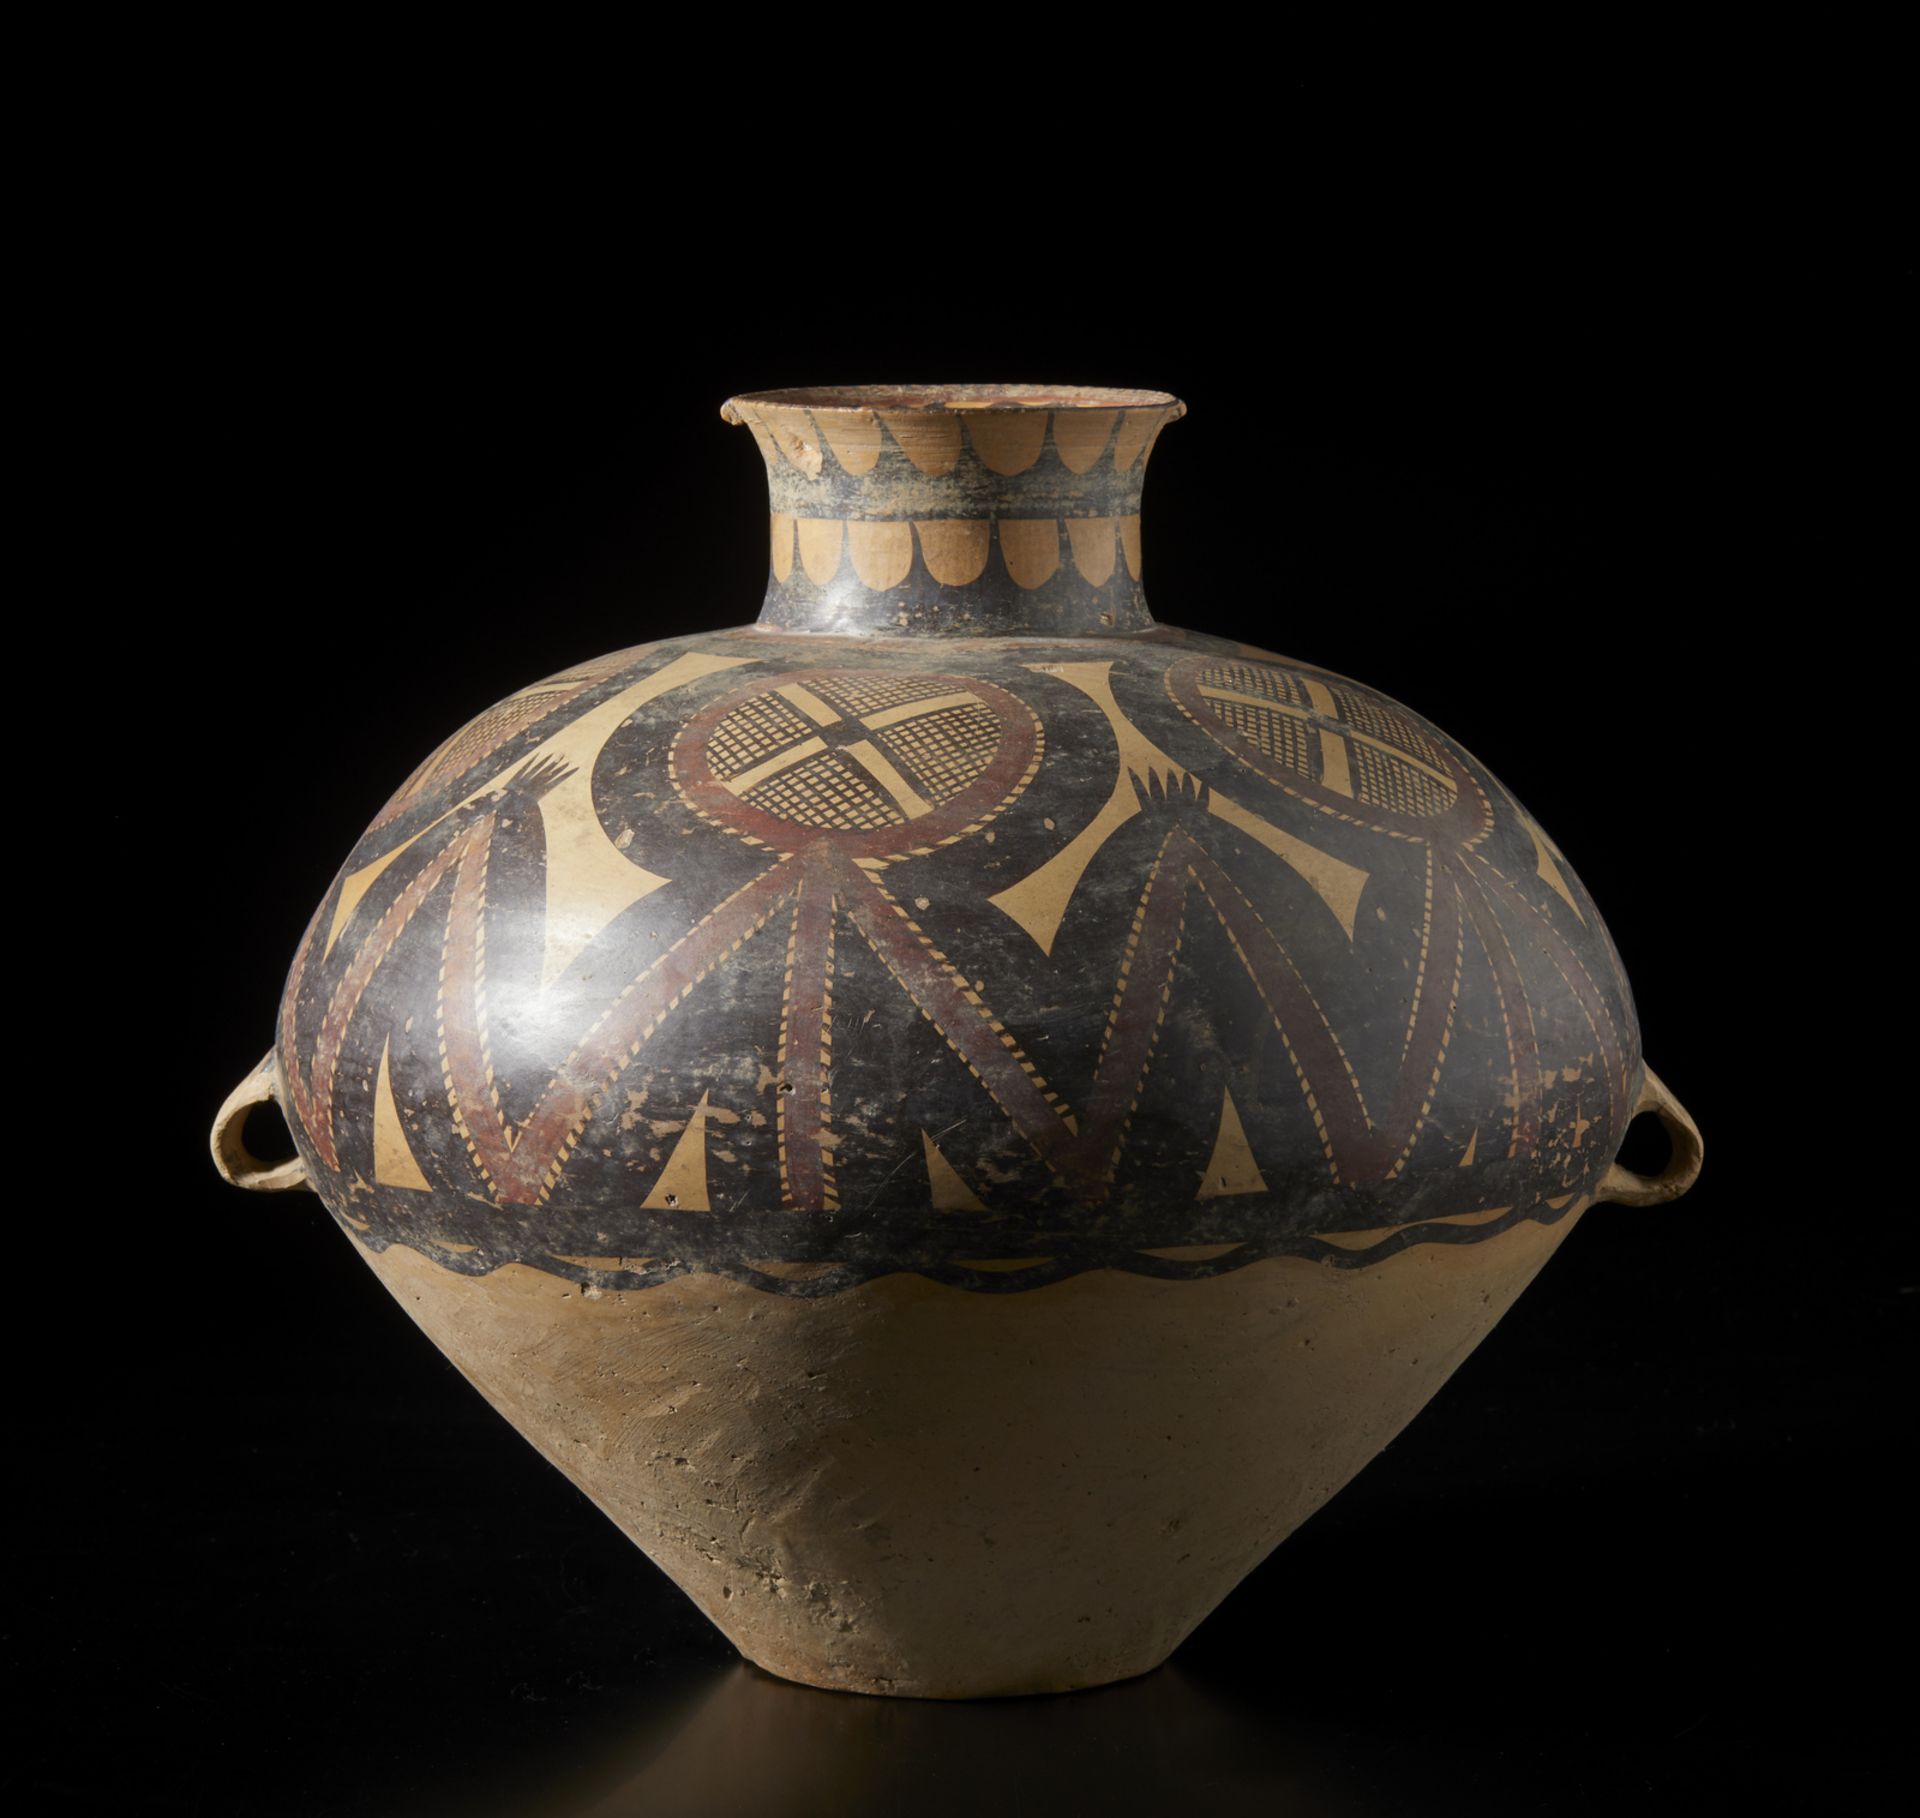 A terracotta jar with abstract and geometric decoration China, Neolithic period Cm 38,00 x 34,00 - Image 4 of 5